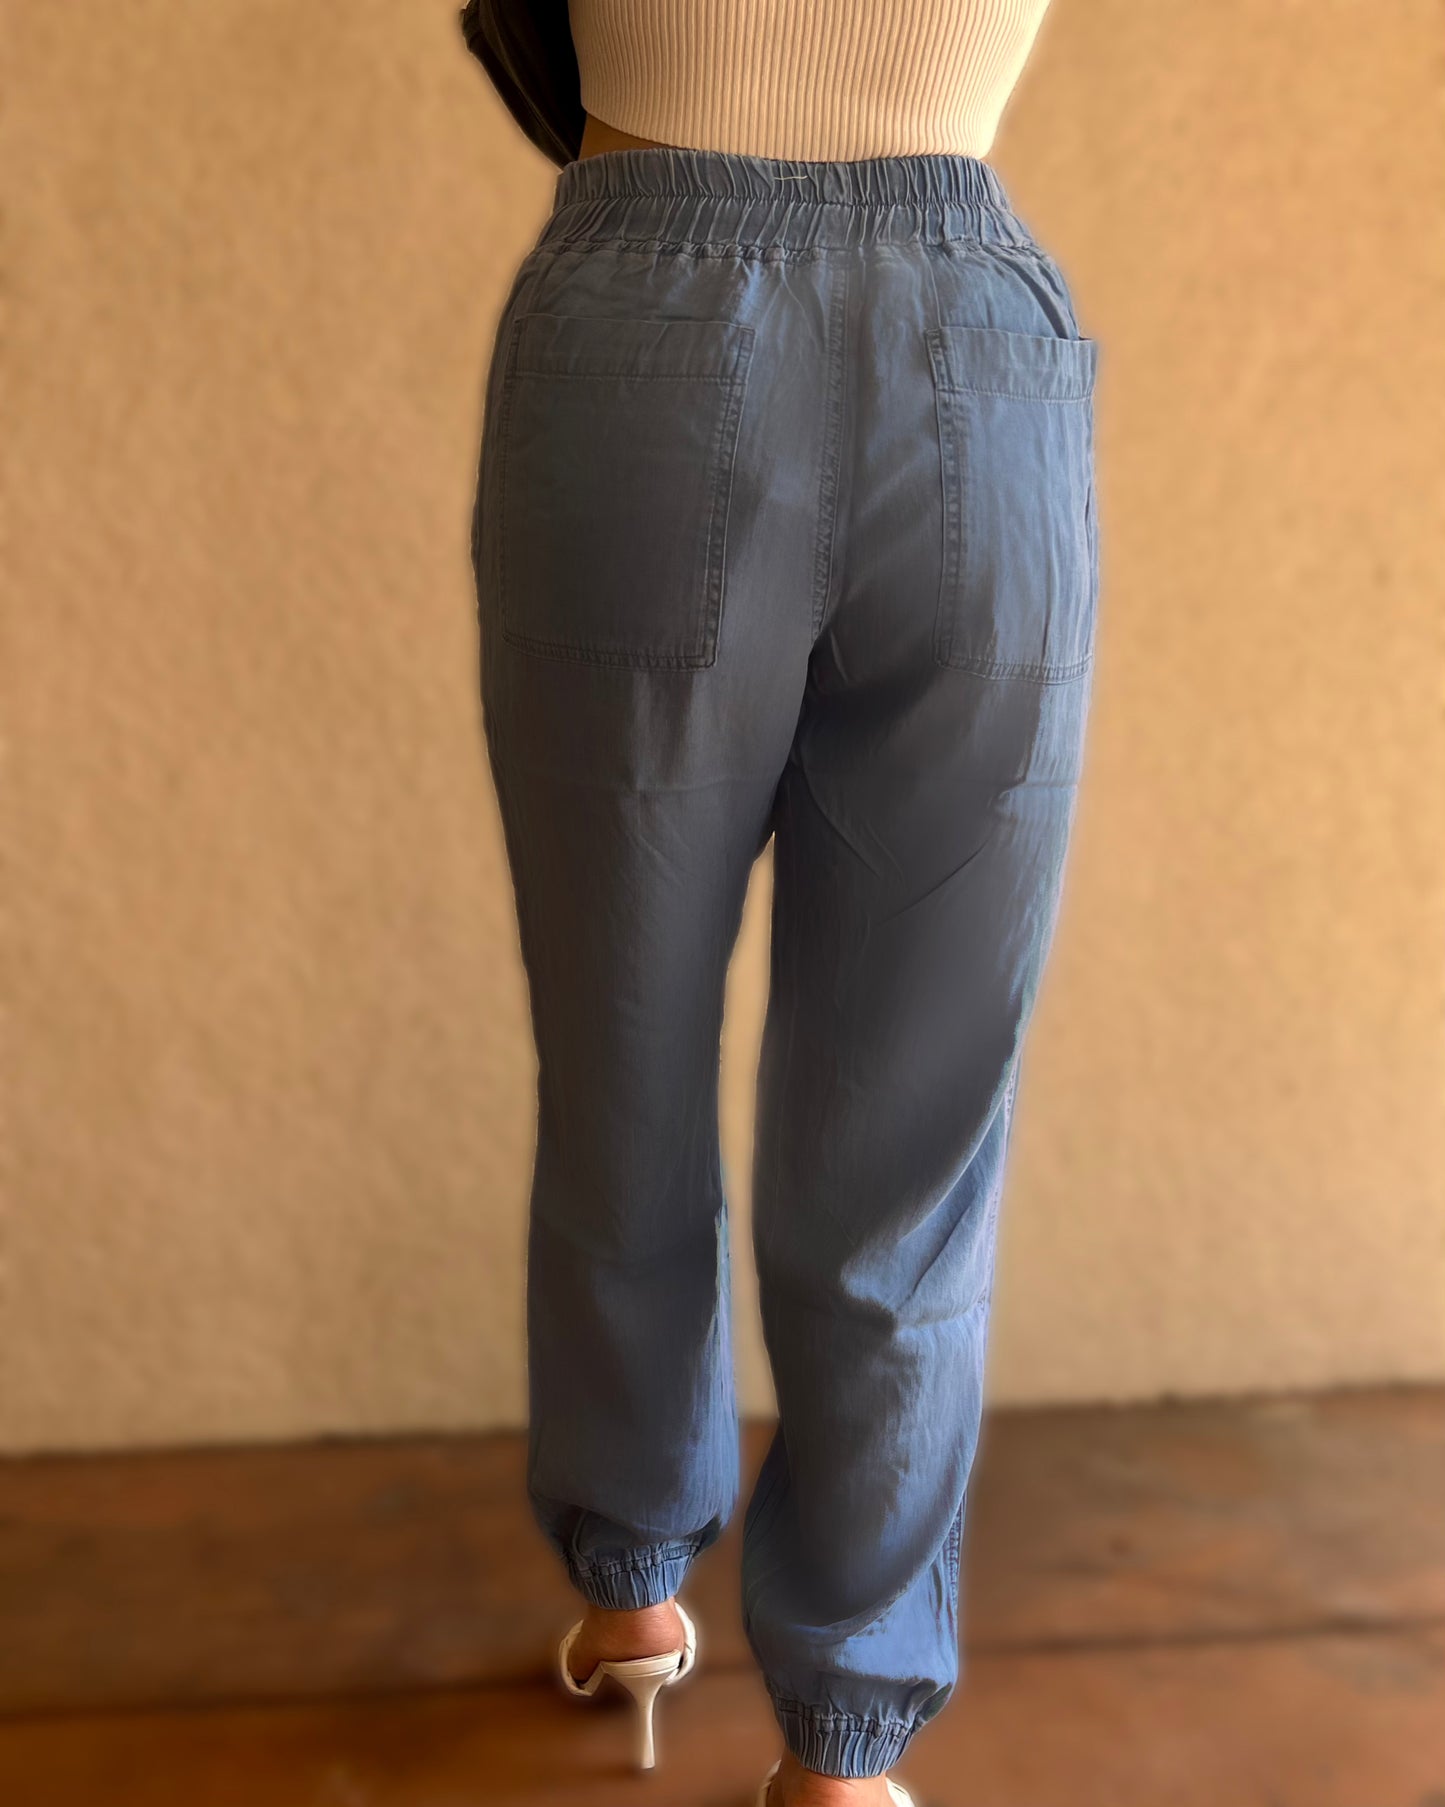 Woven Bottom Pants - Style by me